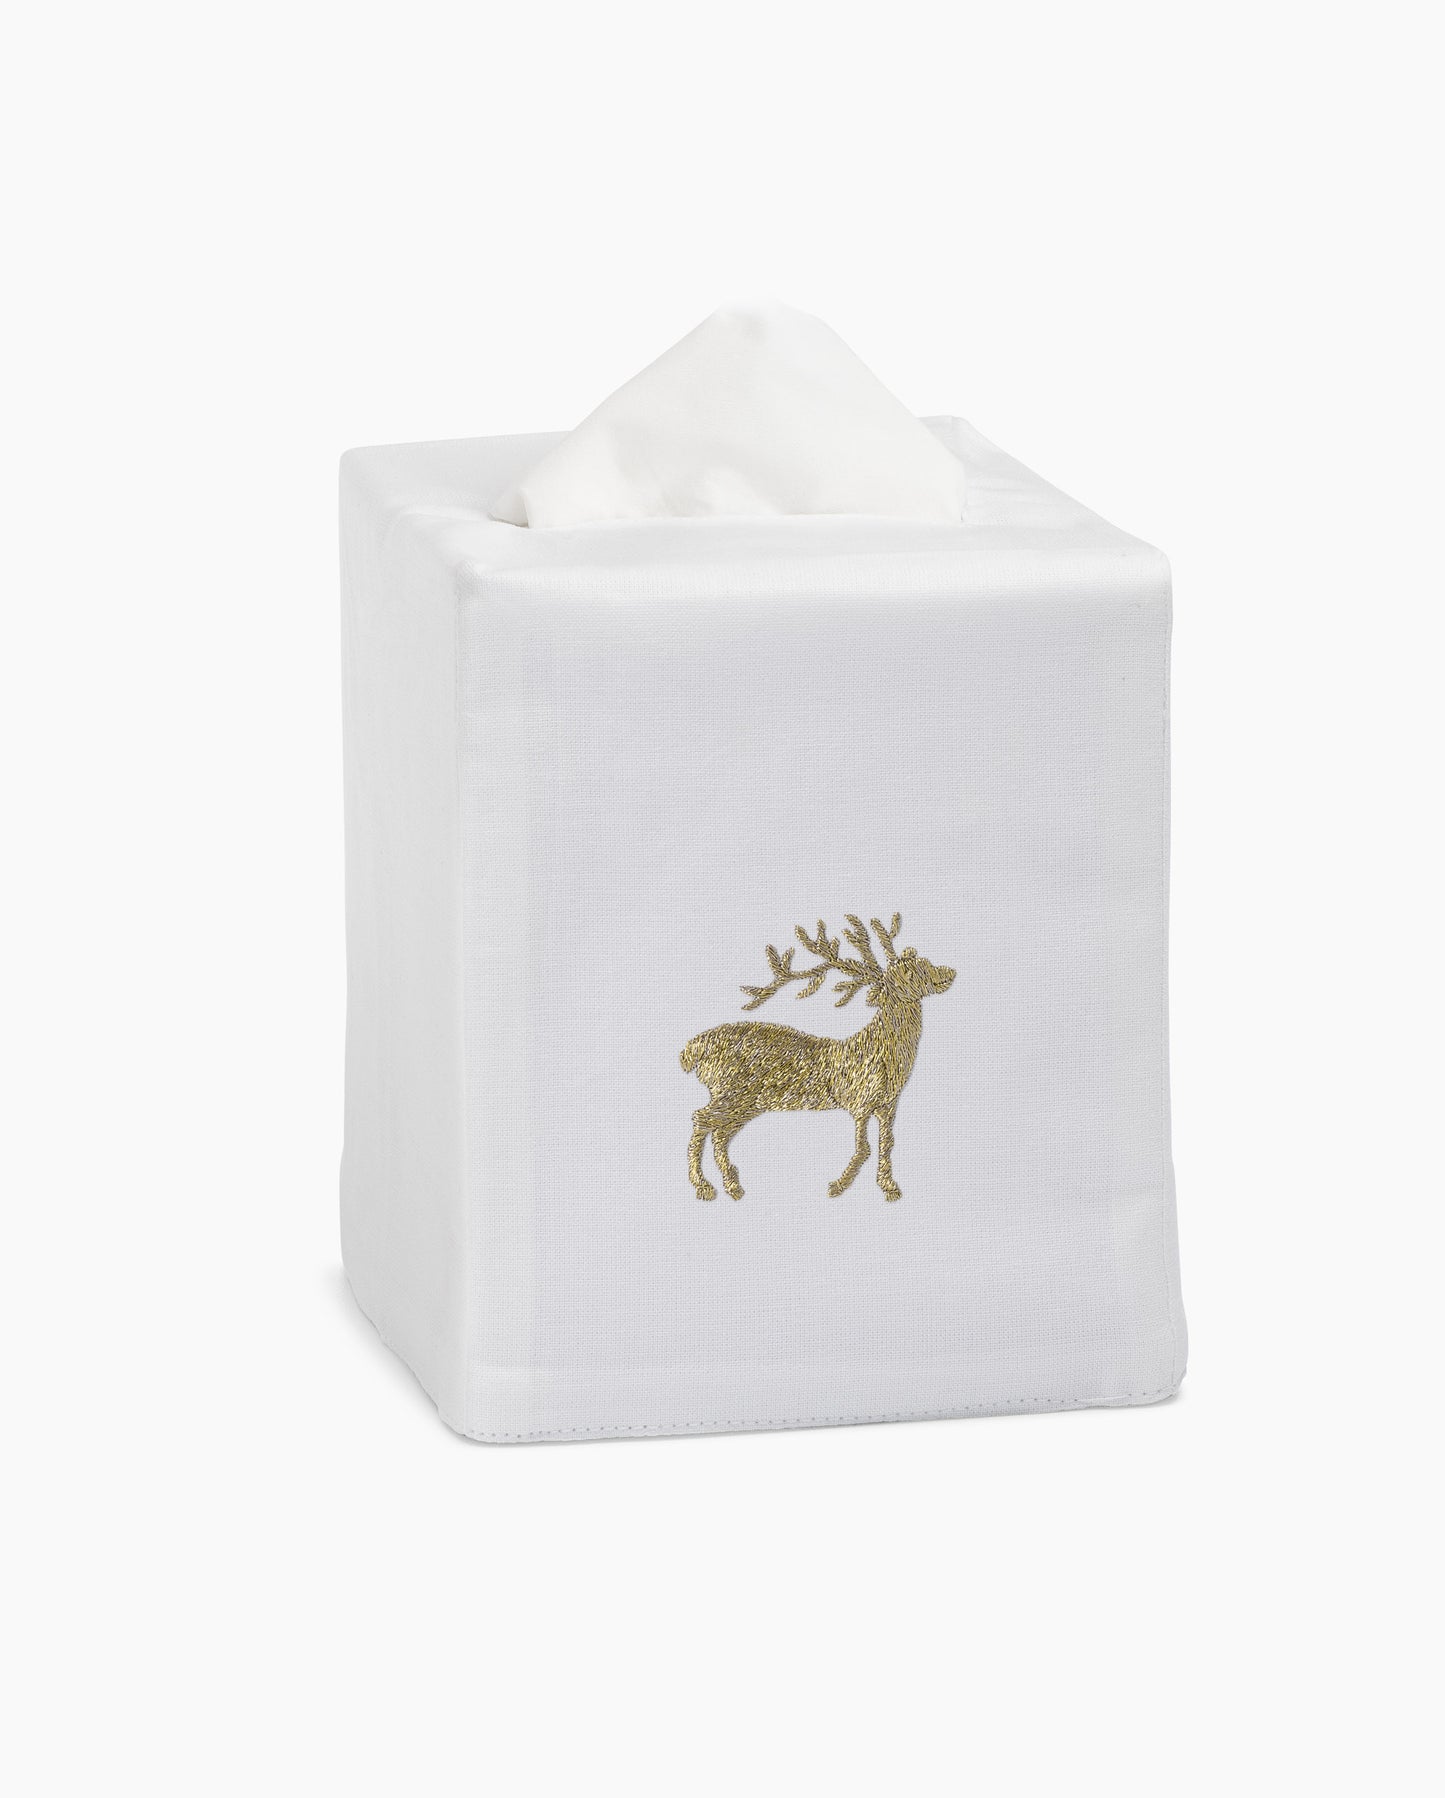 Reindeer Gold Tissue Box Cover